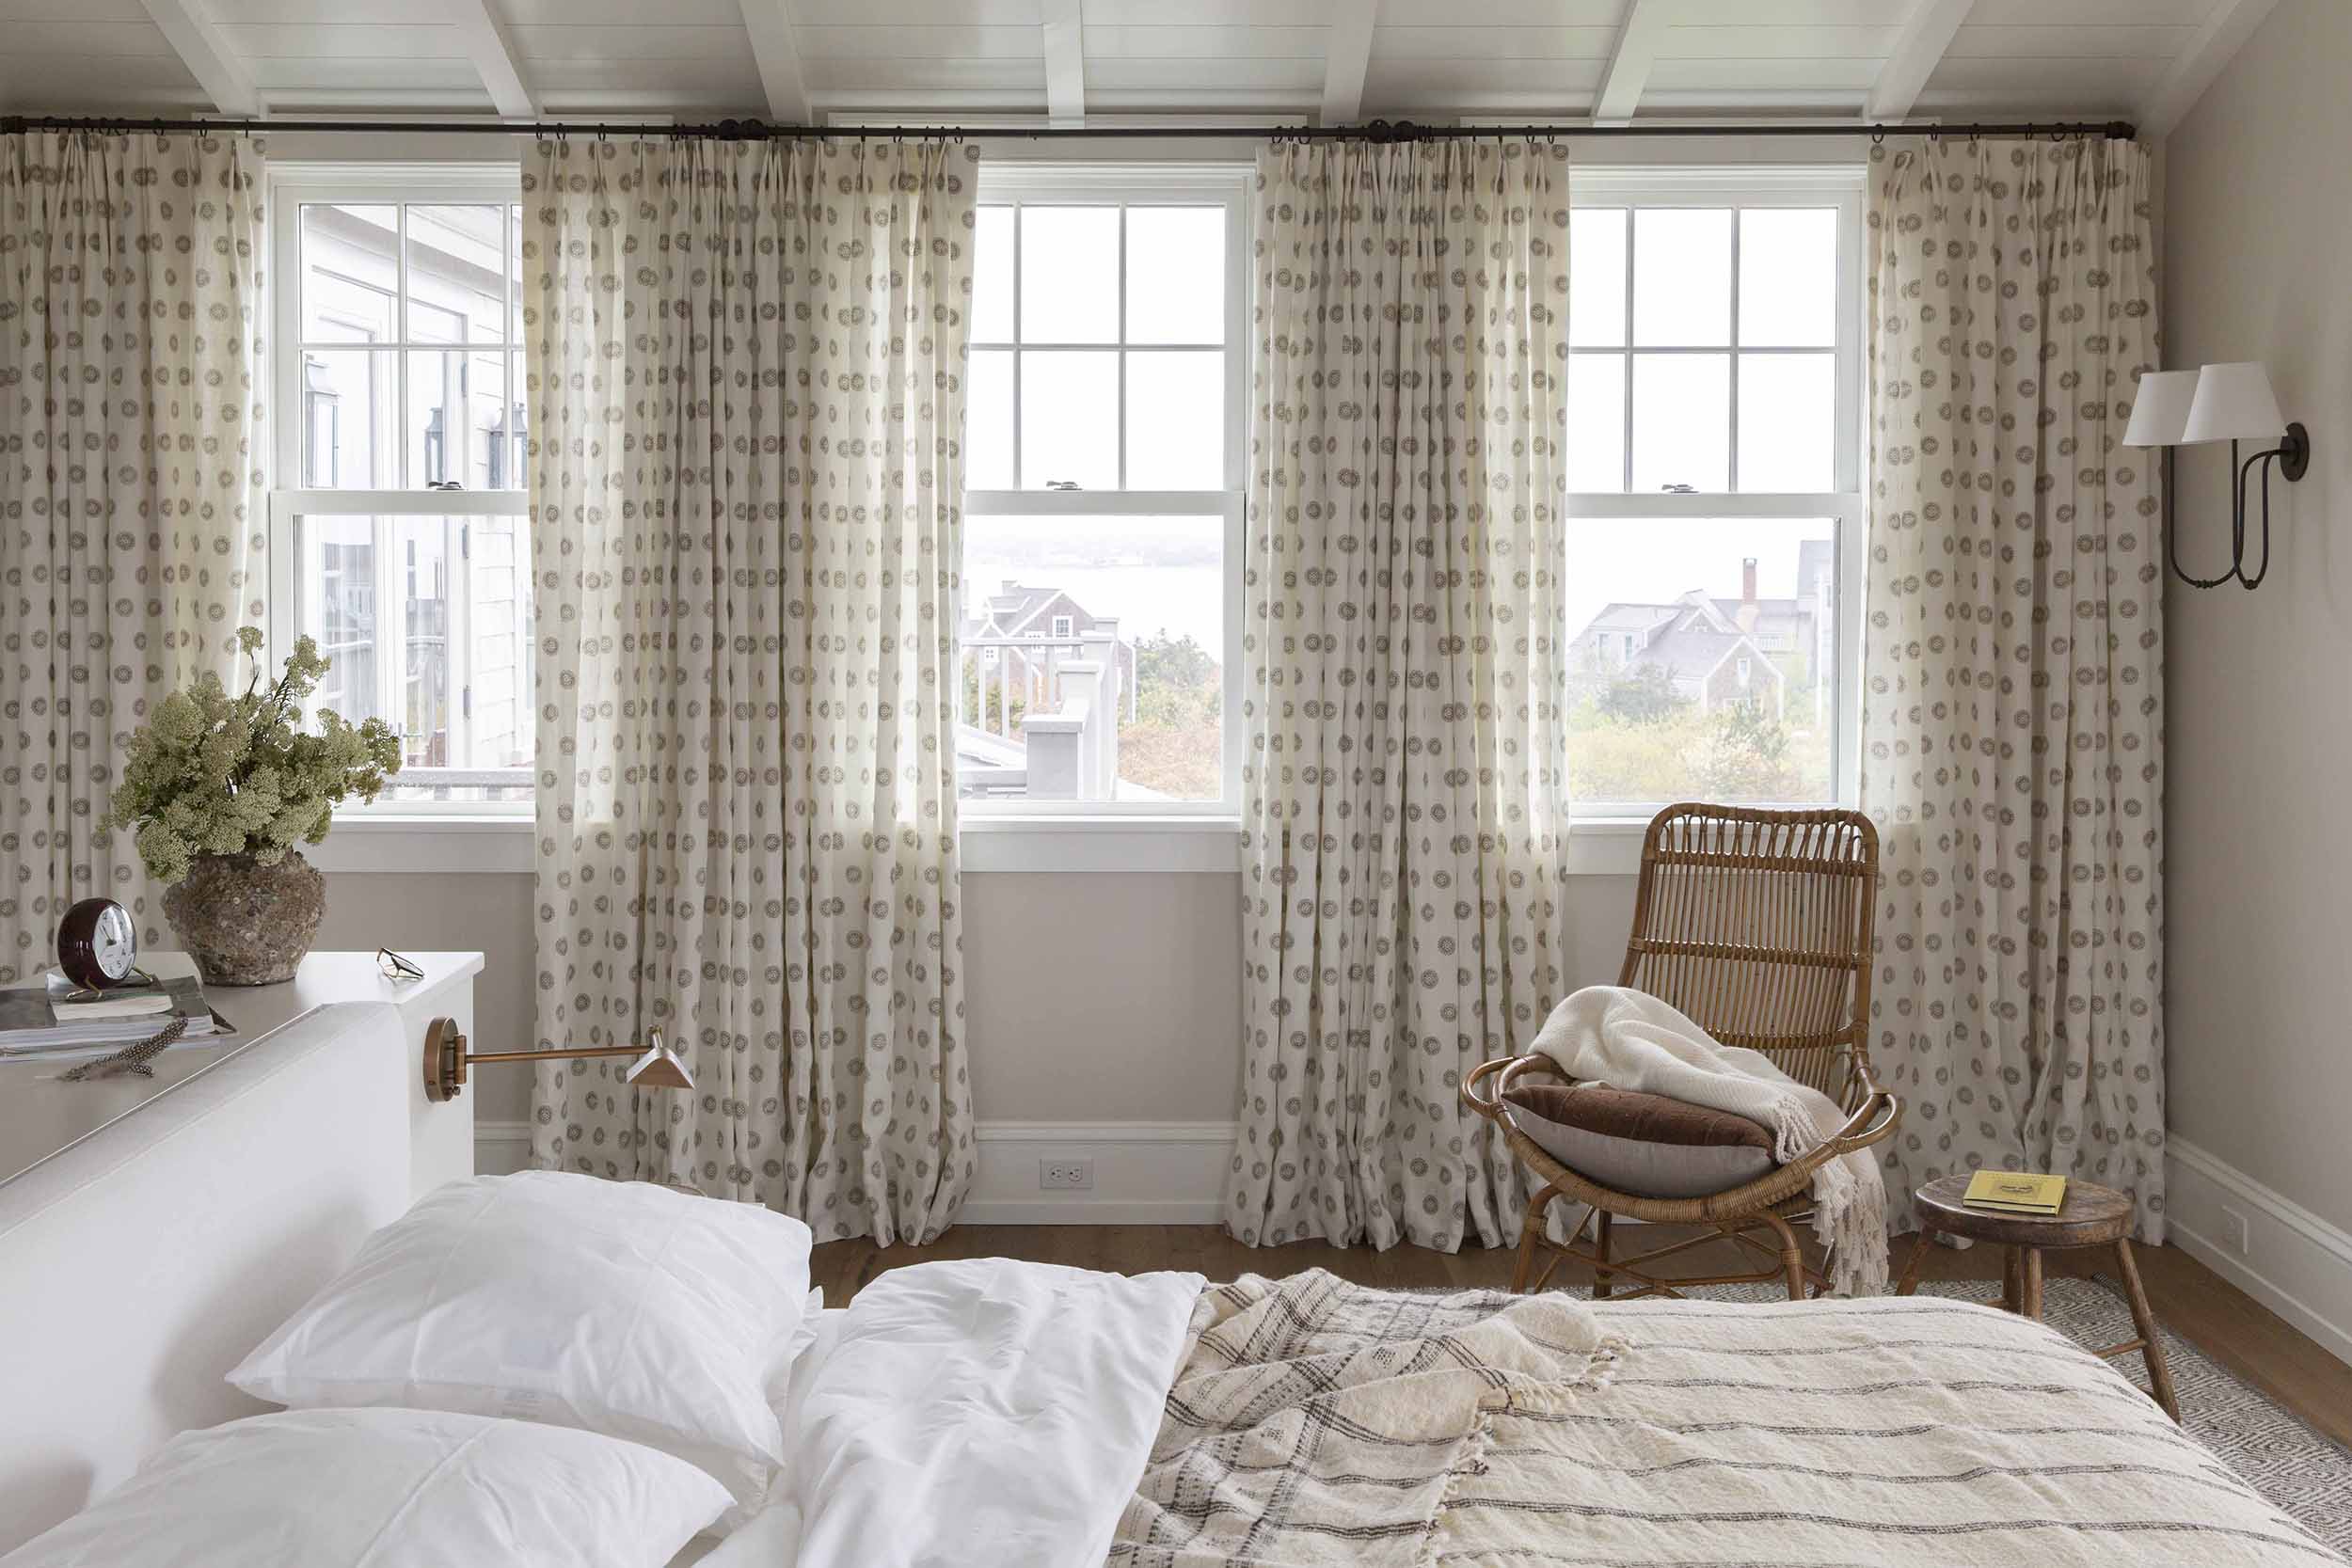 How Wide Should Curtain Panels Be? Knowhow For The Perfect Fit